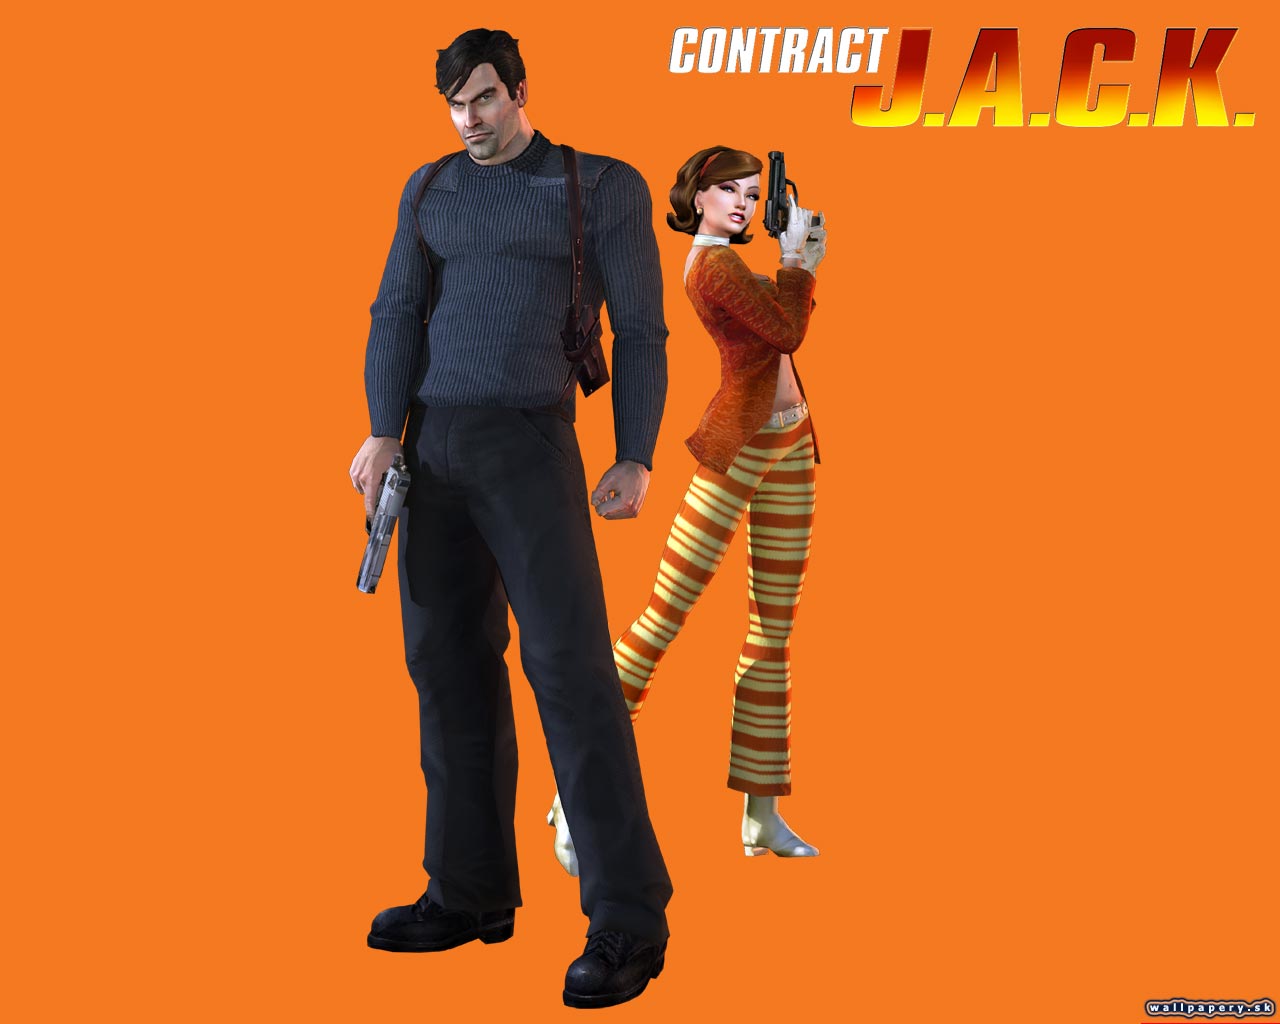 No One Lives Forever 2: Contract J.A.C.K. - wallpaper 3